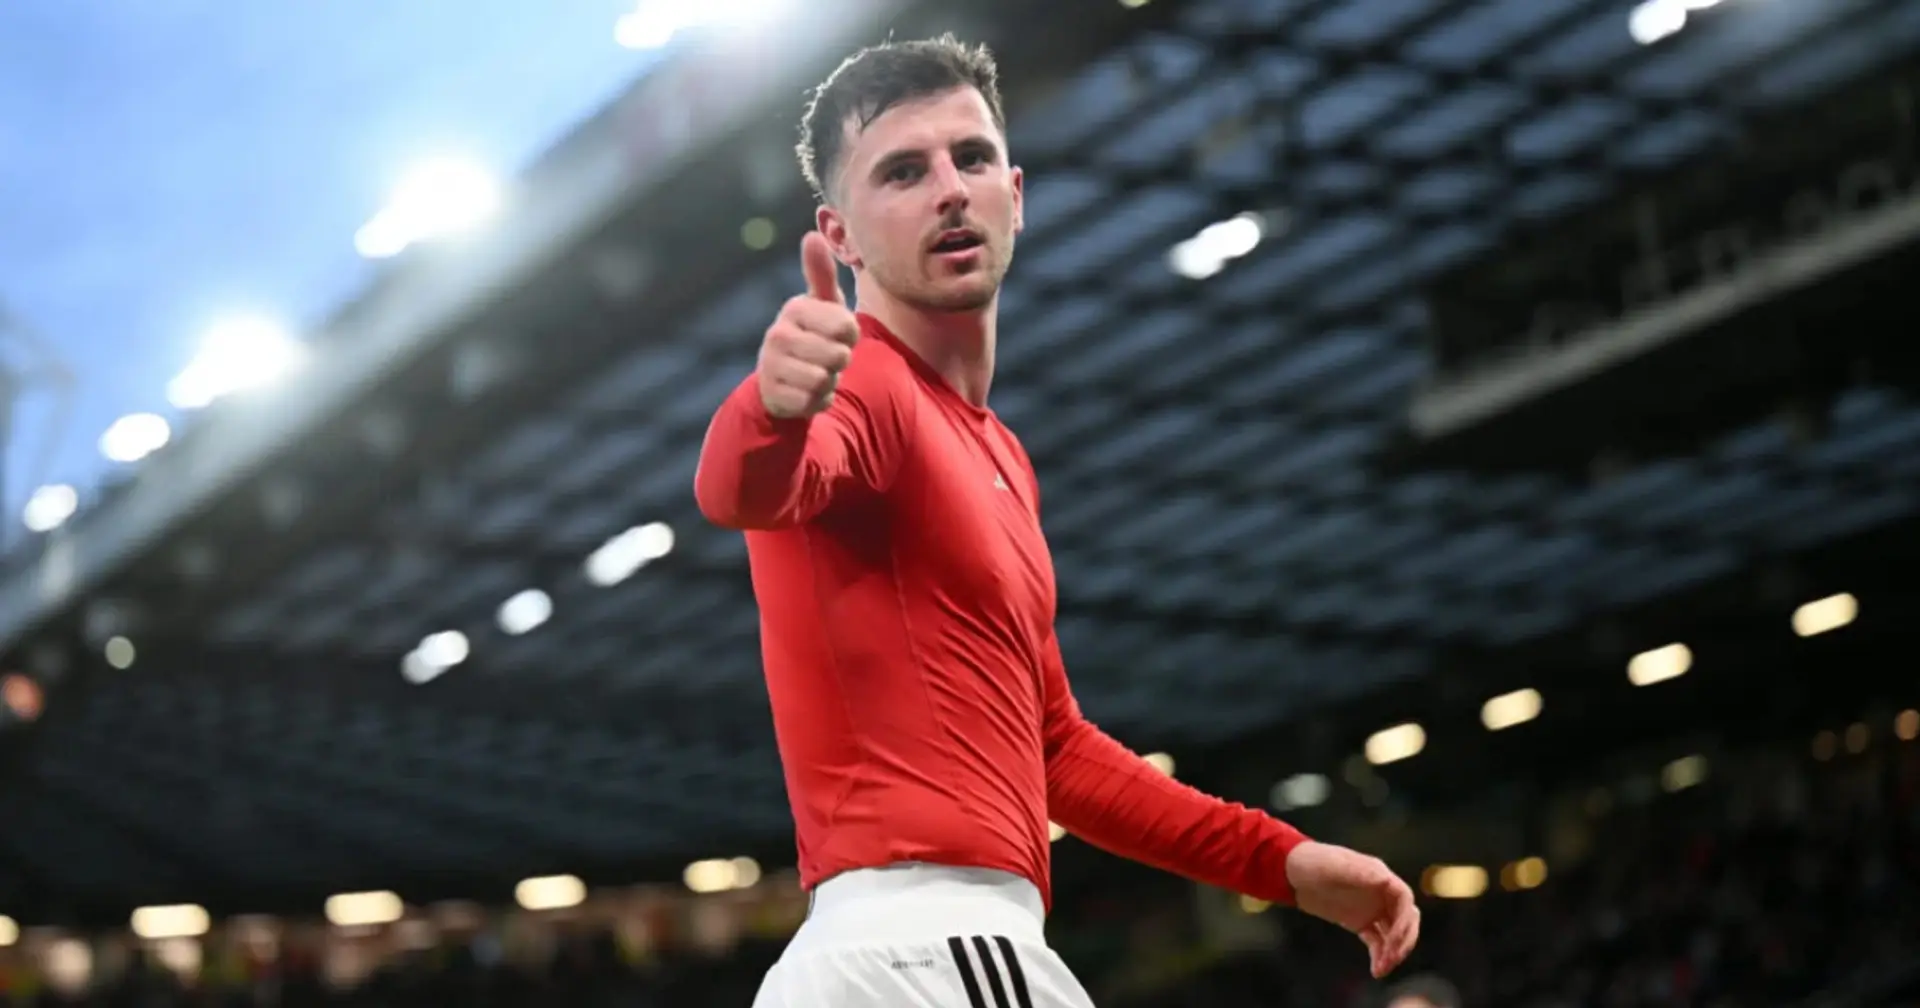 'Get him fit and he'll be an asset': Man United fans back Mason Mount after return from injury